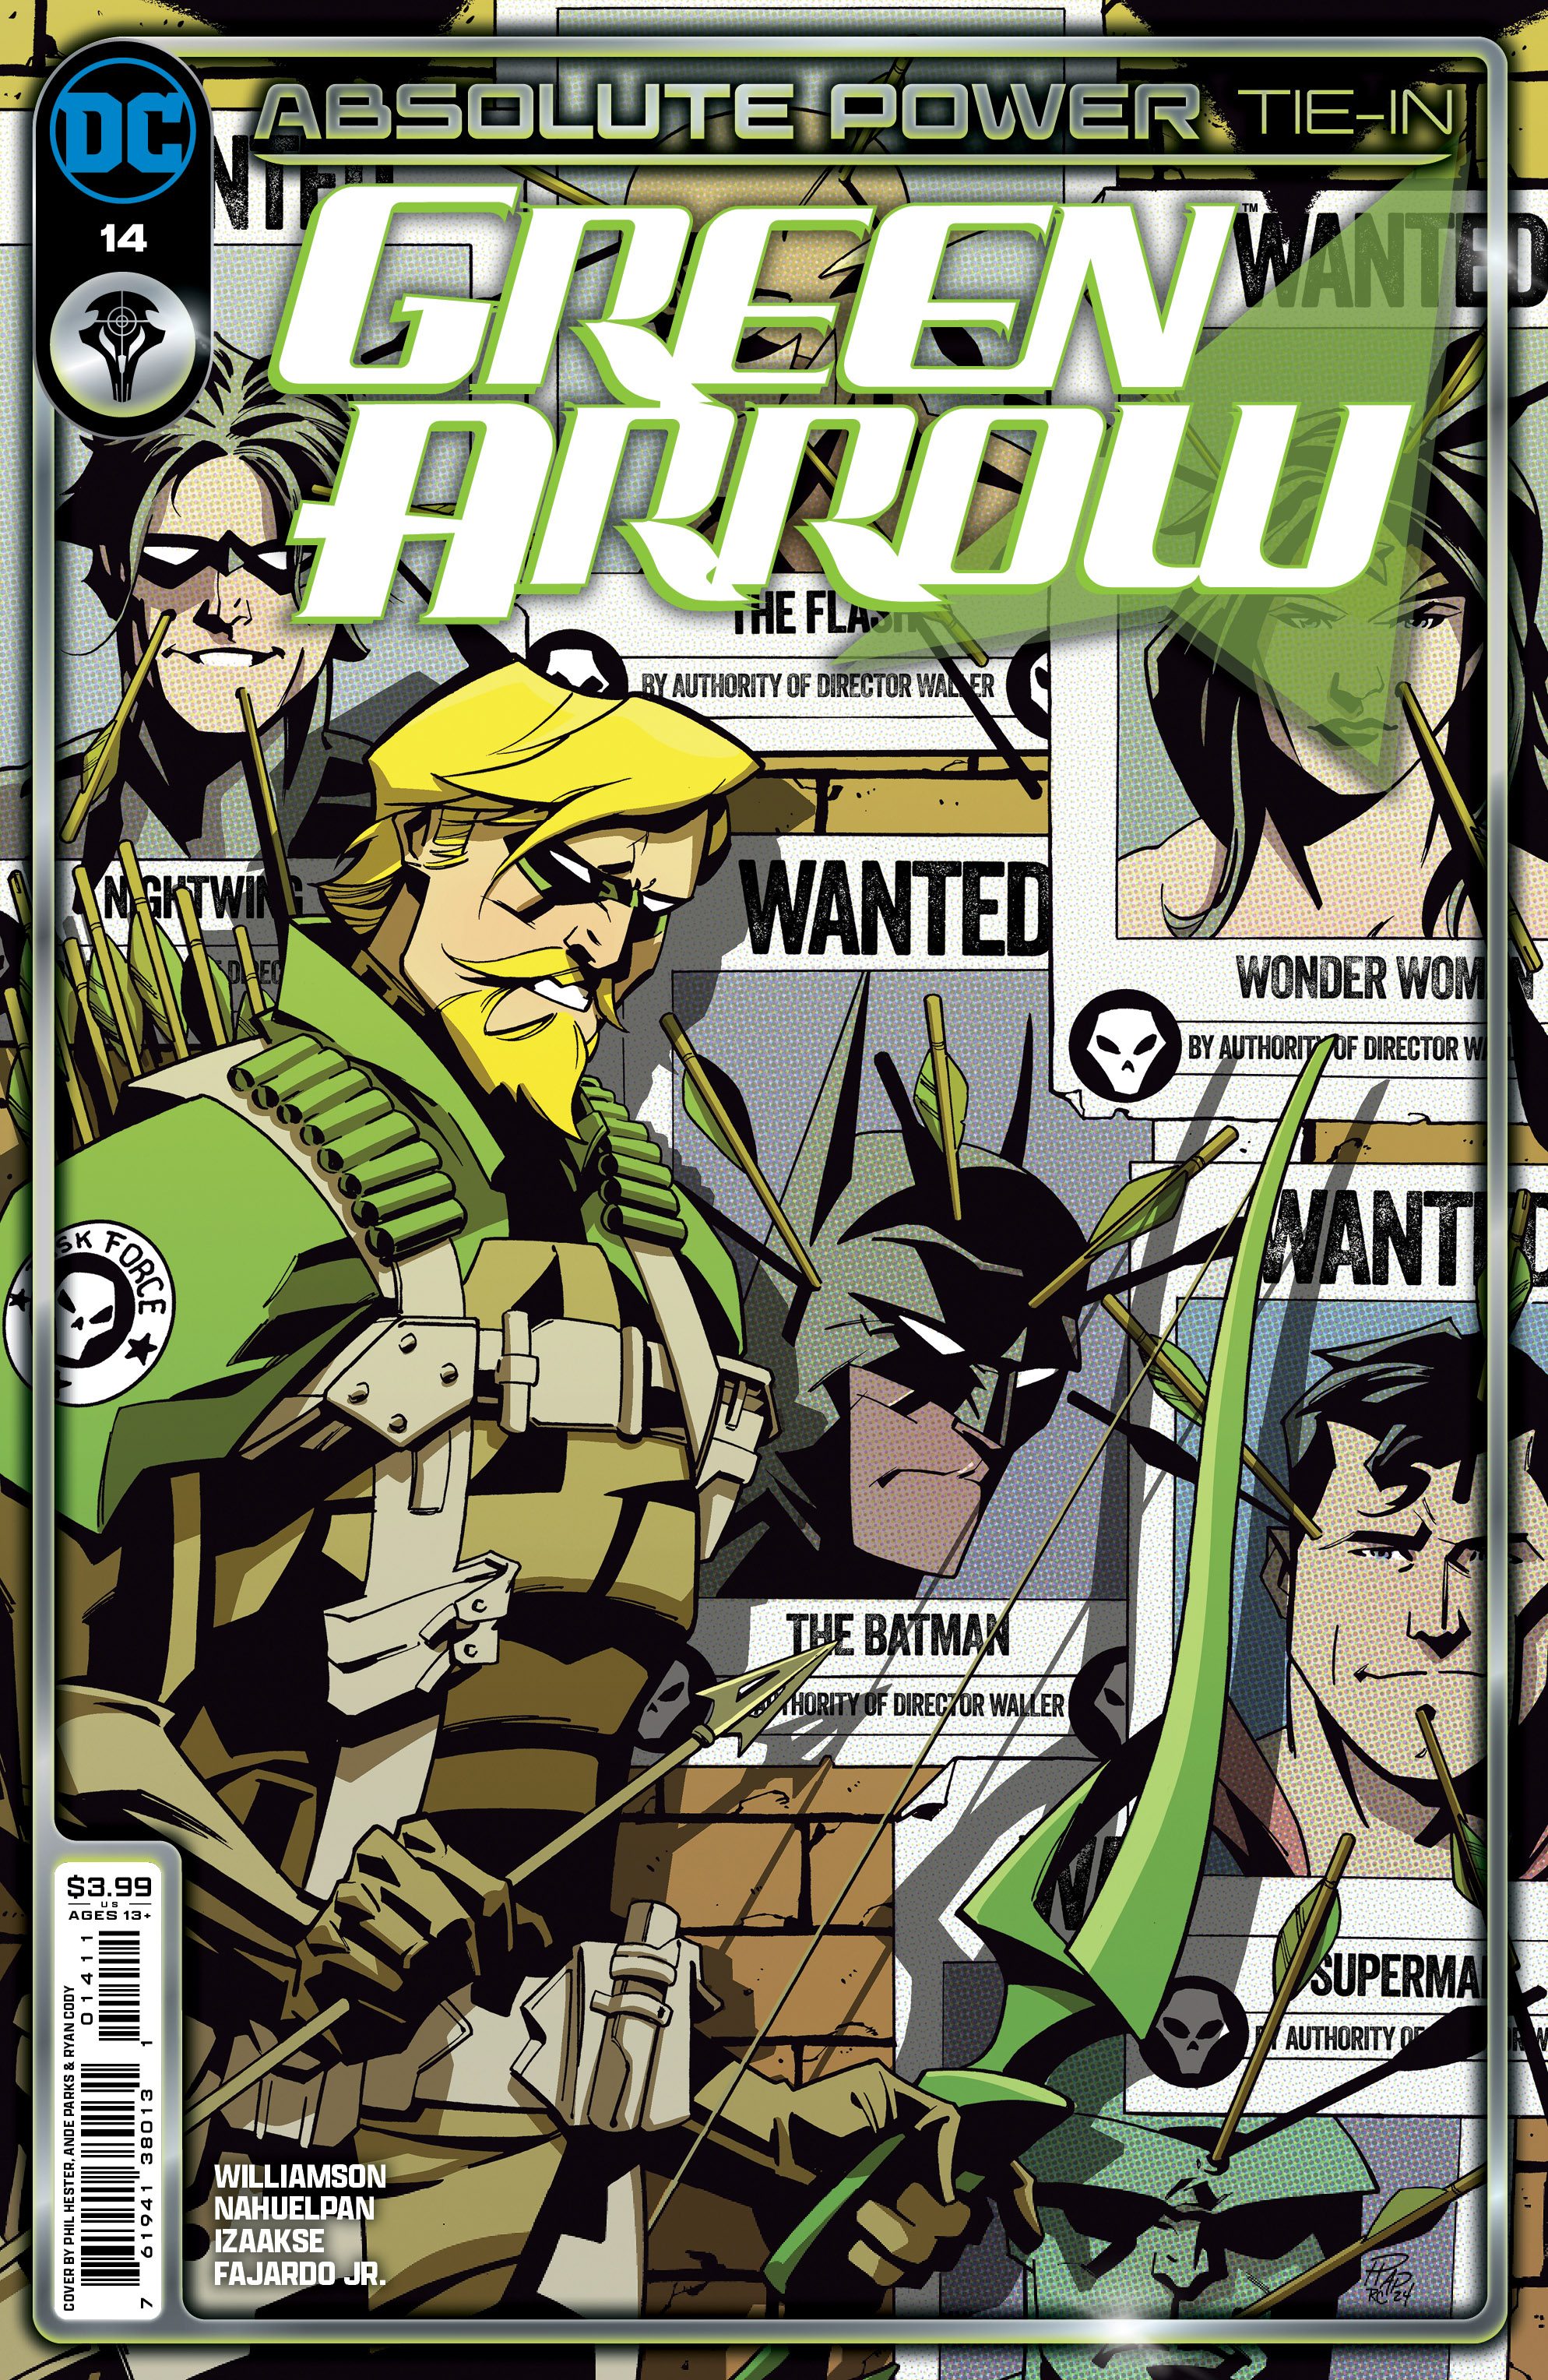 Green Arrow #14 Cover A Phil Hester (Absolute Power)